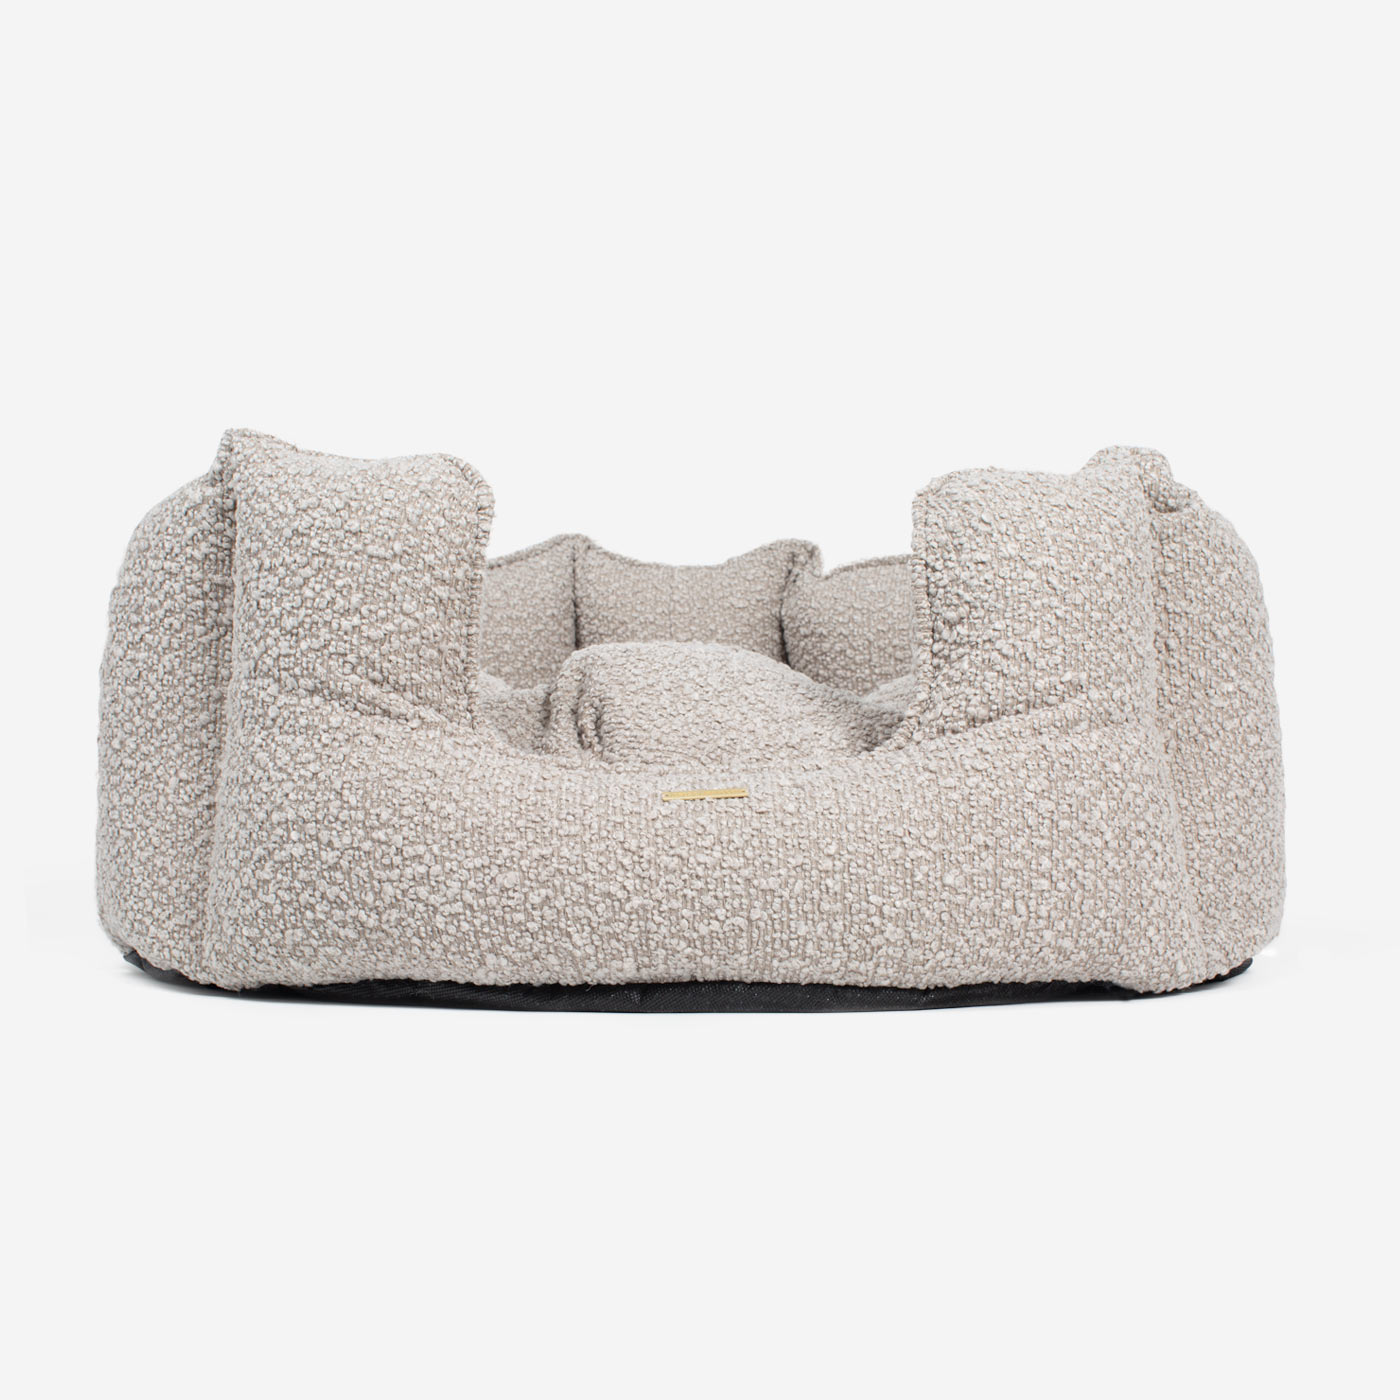 [color:mink boucle] Discover Our Luxurious High Wall Bed For Dogs, Featuring inner pillow with plush teddy fleece on one side To Craft The Perfect Dogs Bed In Stunning Mink Bouclé! Available To Personalize Now at Lords & Labradors US